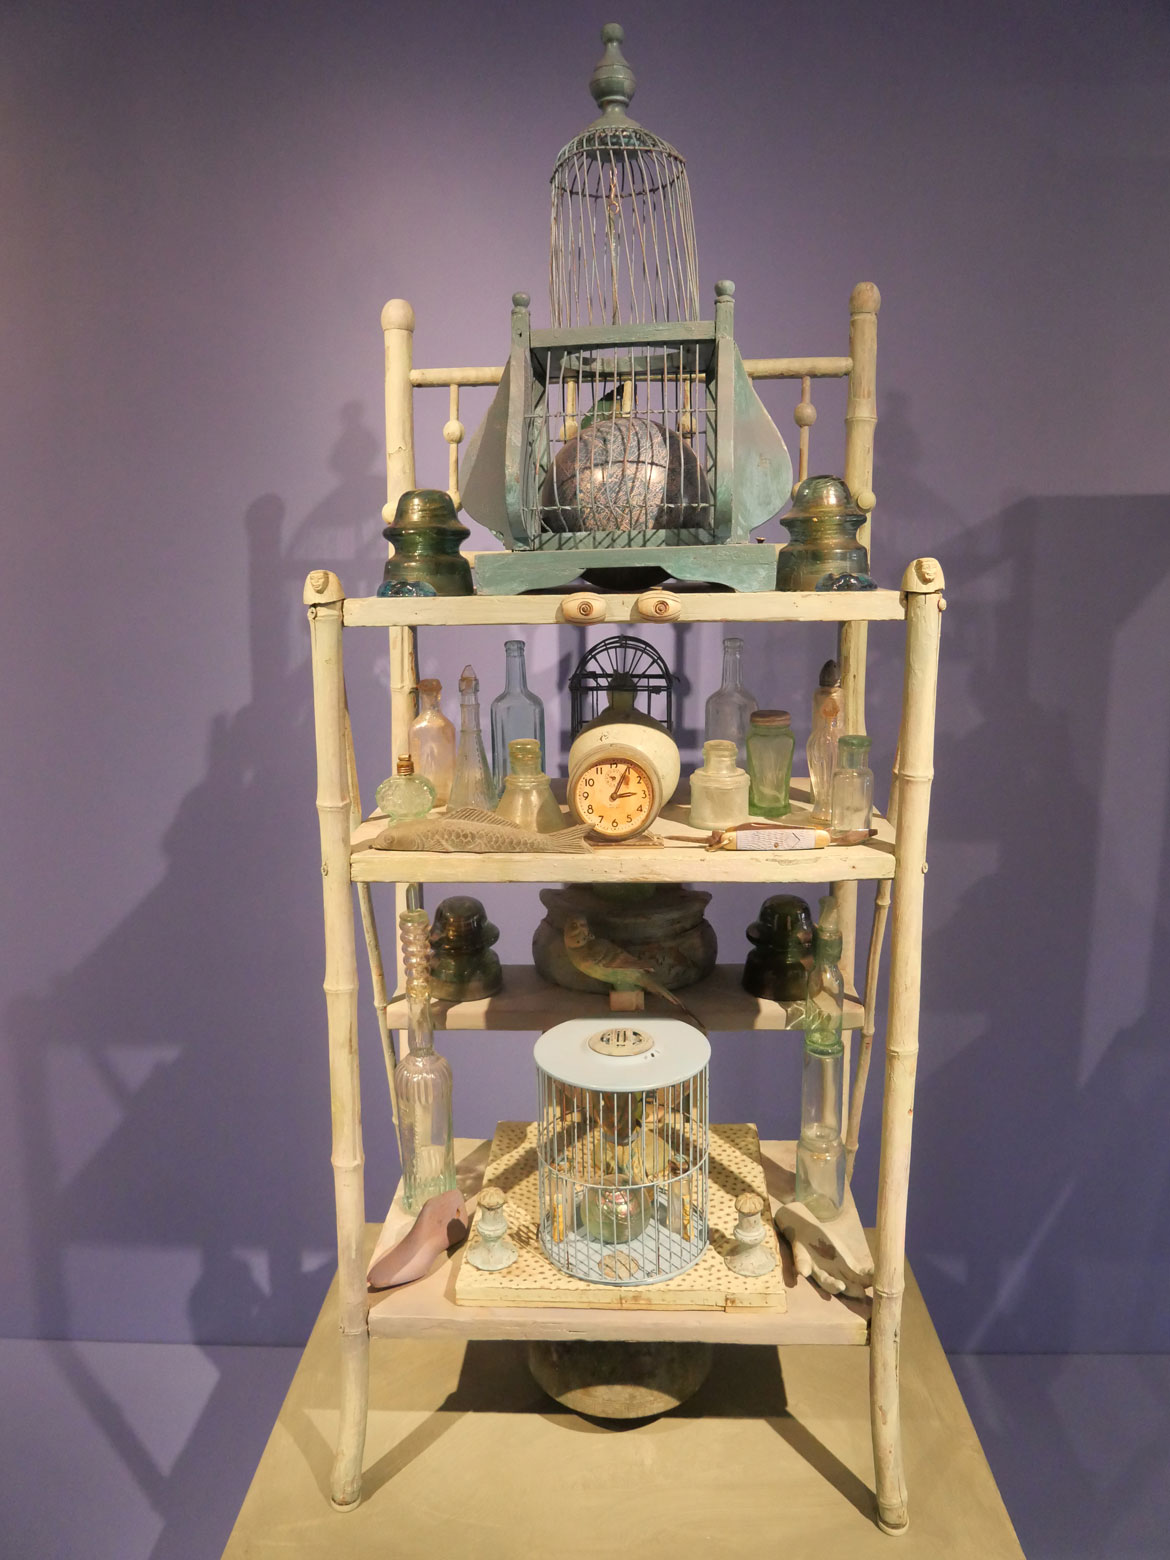 Betye Saar, "Objects, Obsessions, Obligations," 2013, Mixed media assemblage.